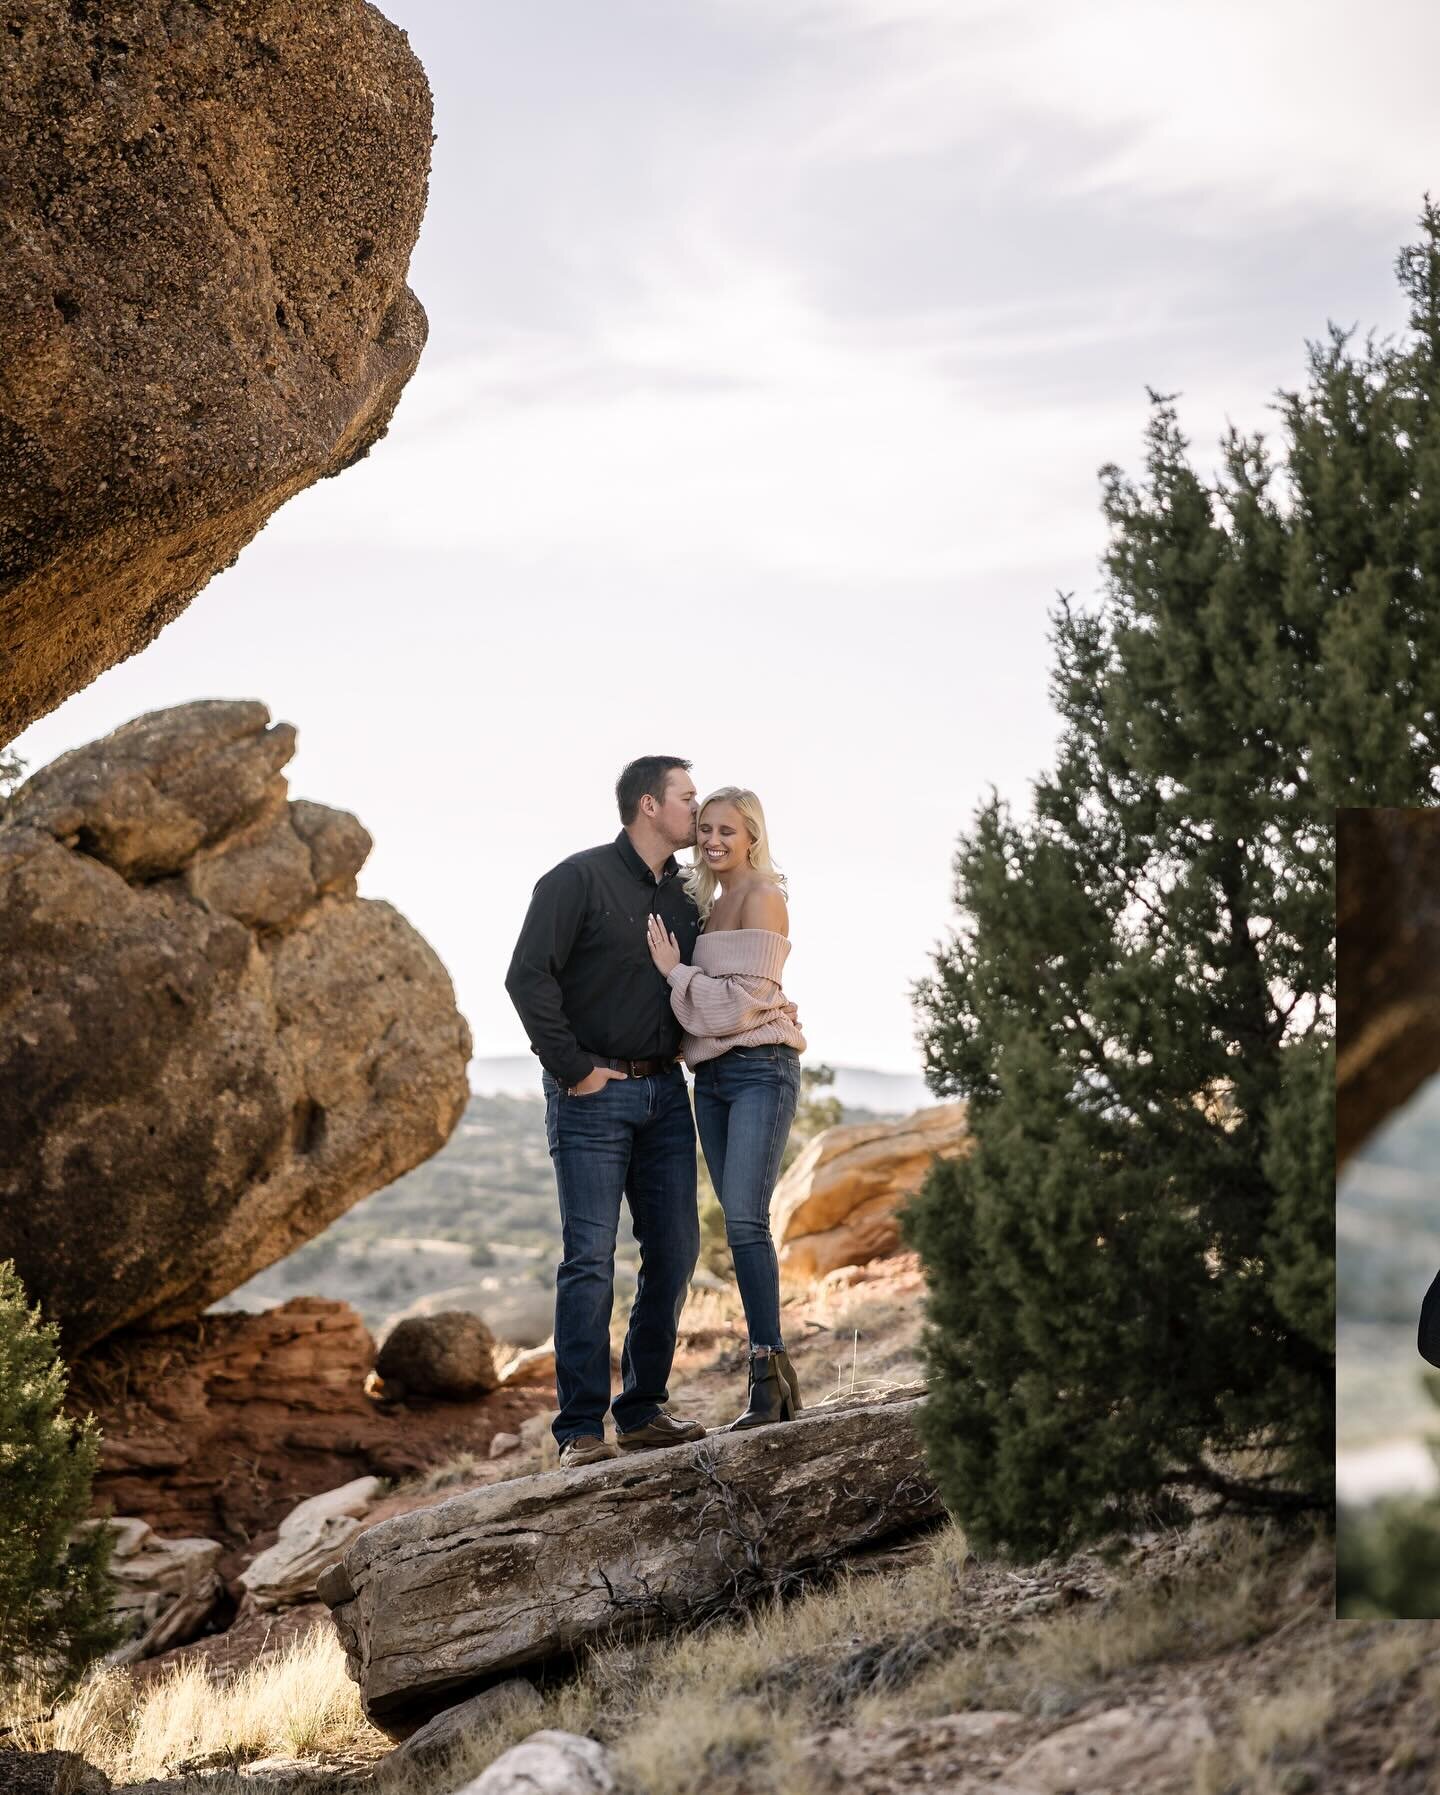 Capturing love&rsquo;s adventure amidst Wyoming&rsquo;s red rock wonders! From the rugged cliffs to the boundless skies, I love your laughs and love, I&rsquo;m so excited for you two to embark on this journey together. Congrats Kaitlyn and Gunner!

#